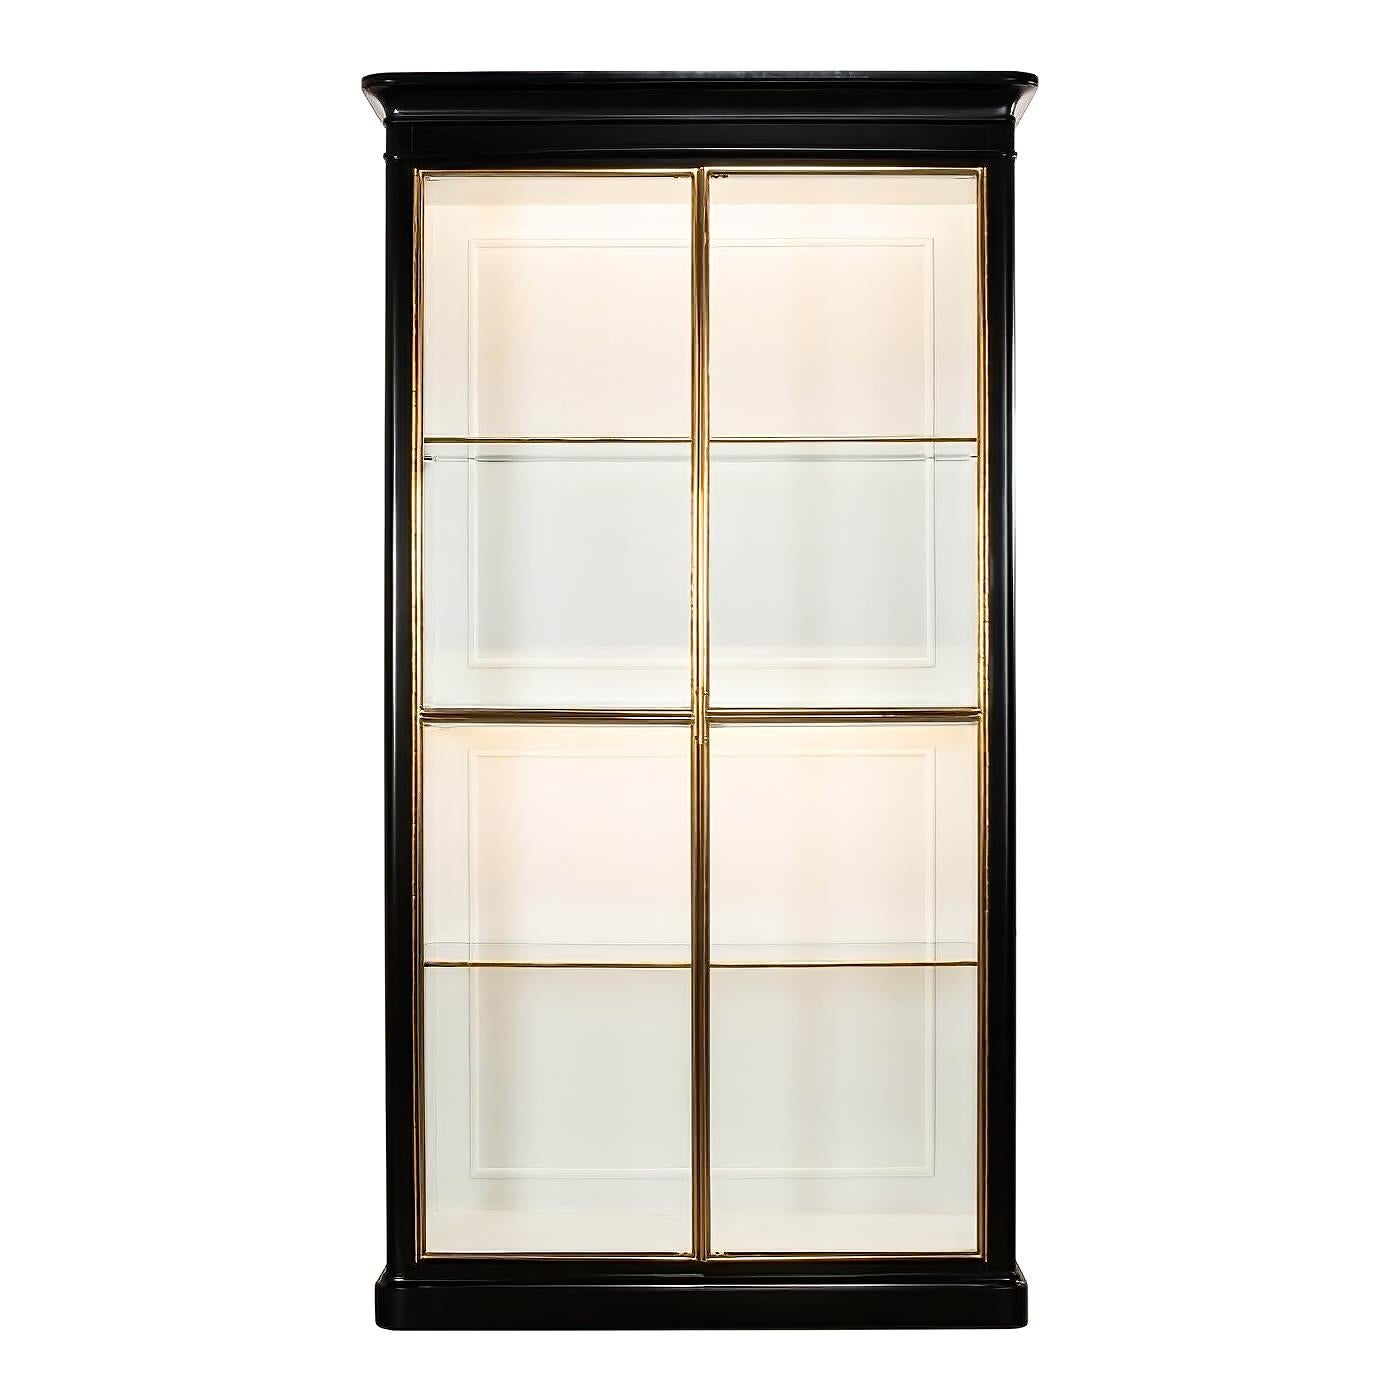 Modern ebonized glass door bookcase with brass trim. An elegant and sophisticated piece in a larger size perfect for display.

This etagere has two glass framed doors that open making it easy to protect and showcase treasured items. This etagere